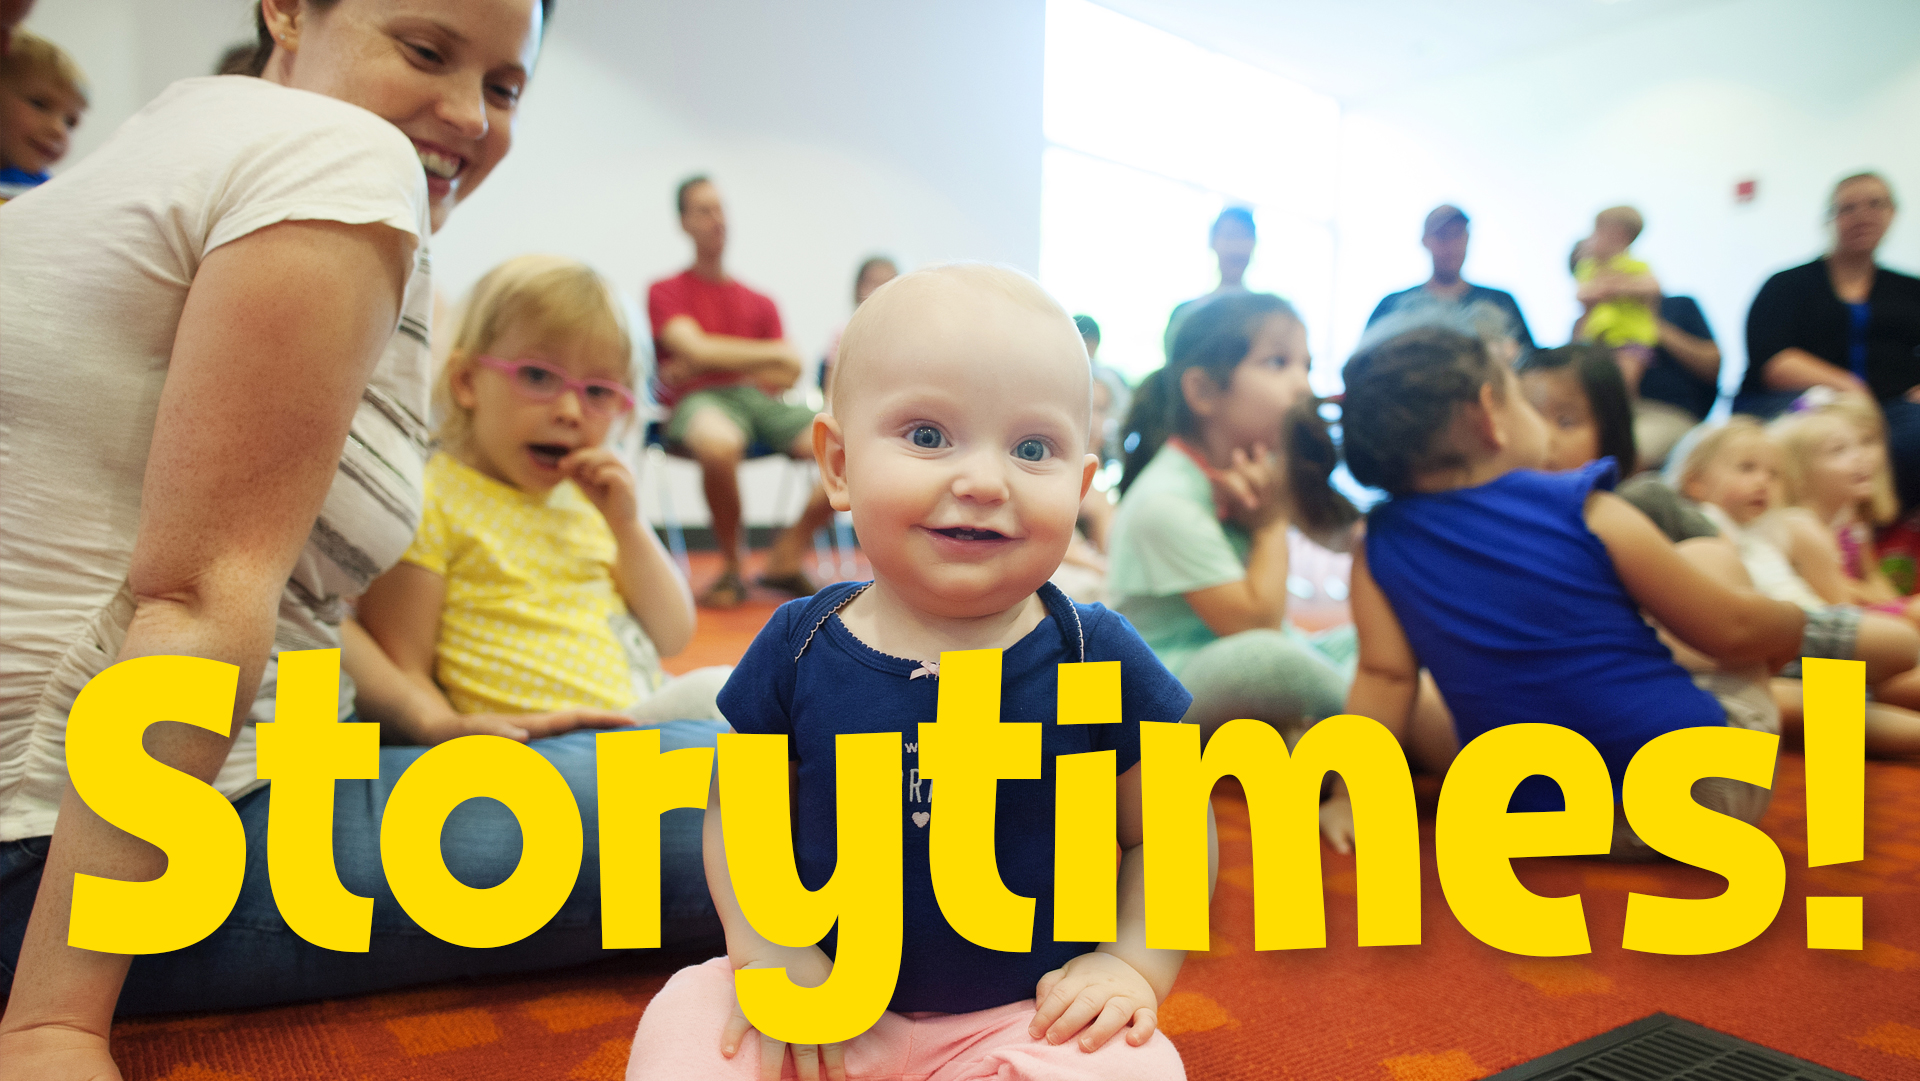 baby smiling at camera, children behind sitting on carpet listening to story, parents in chairs, at the library